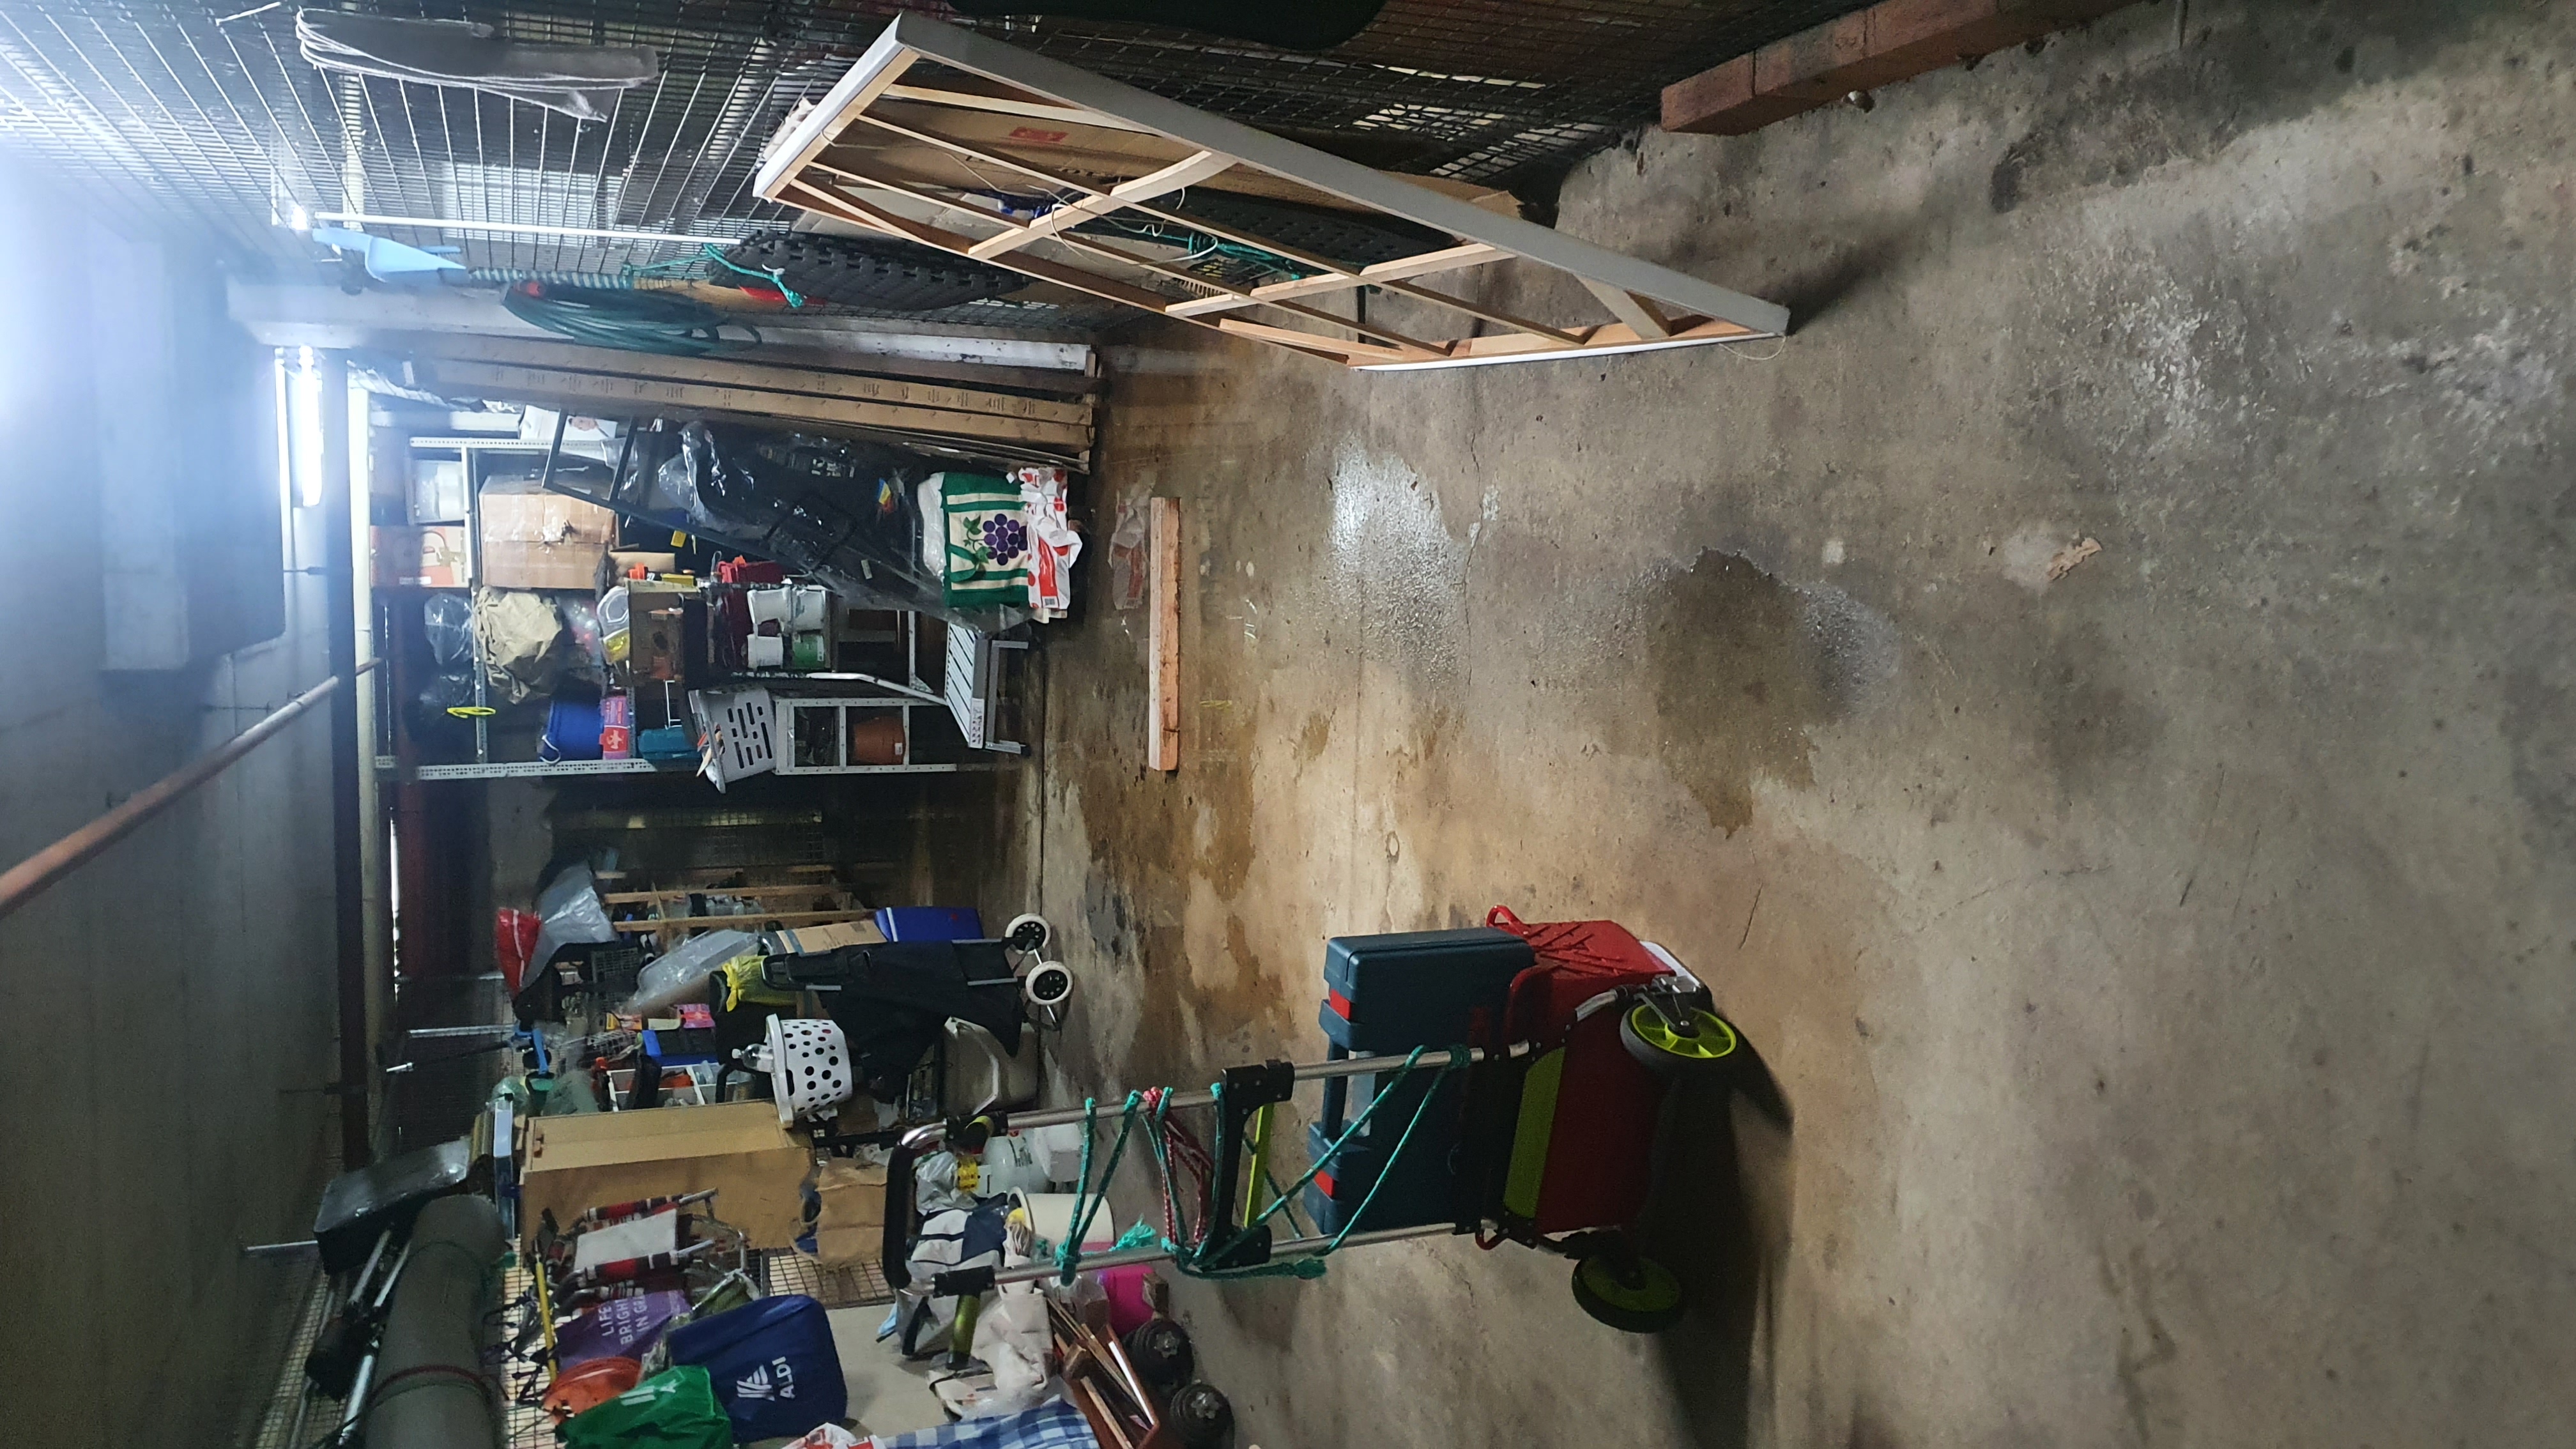 SP52948-examples-of-serious-damages-due-to-water-leakages-in-Lot-186-garage-photo-5-1Mar2022.jpg